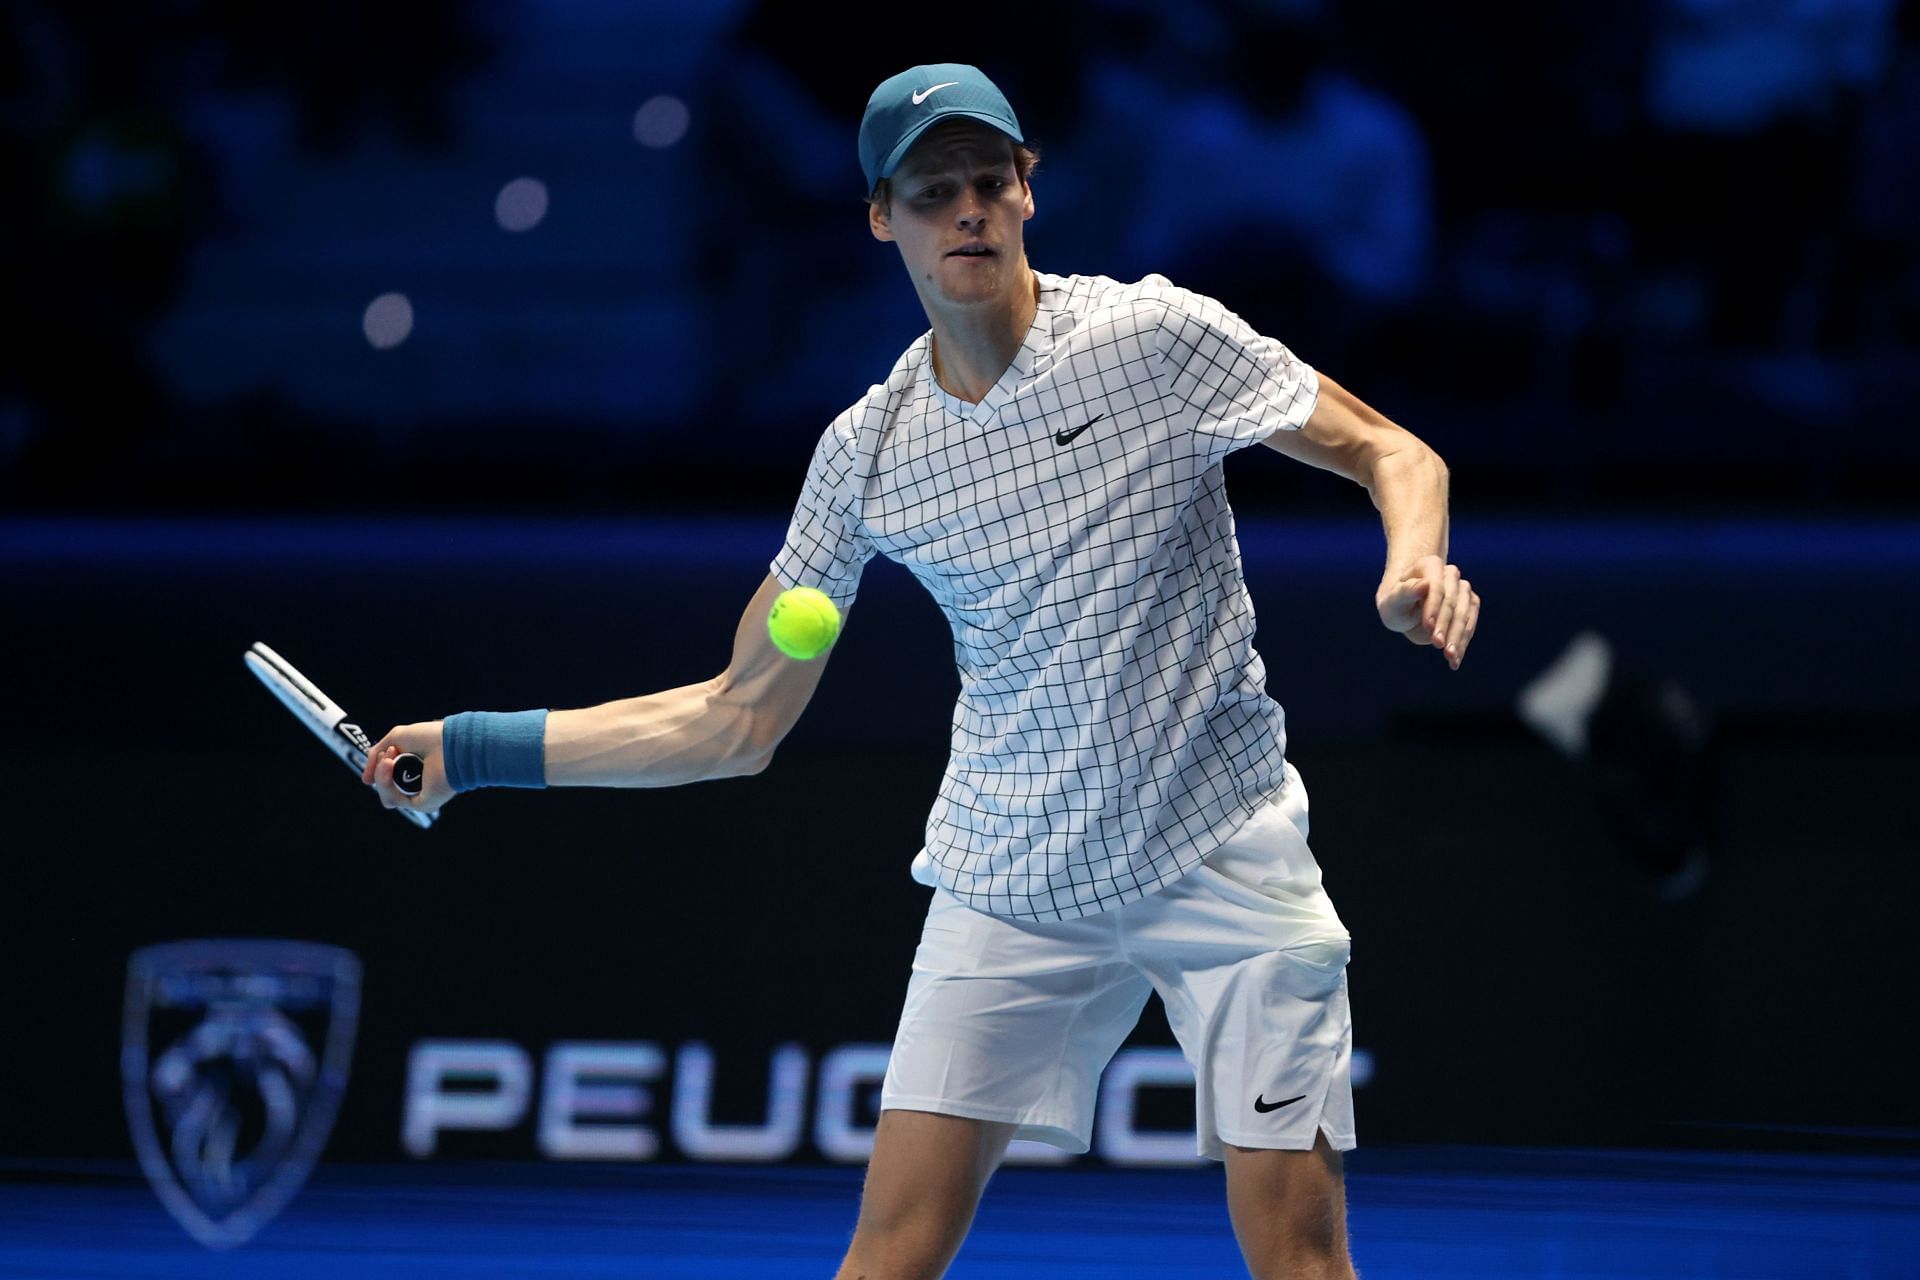 Jannik Sinner during his match with Daniil Medvedev at the 2021 Nitto ATP World Tour Finals